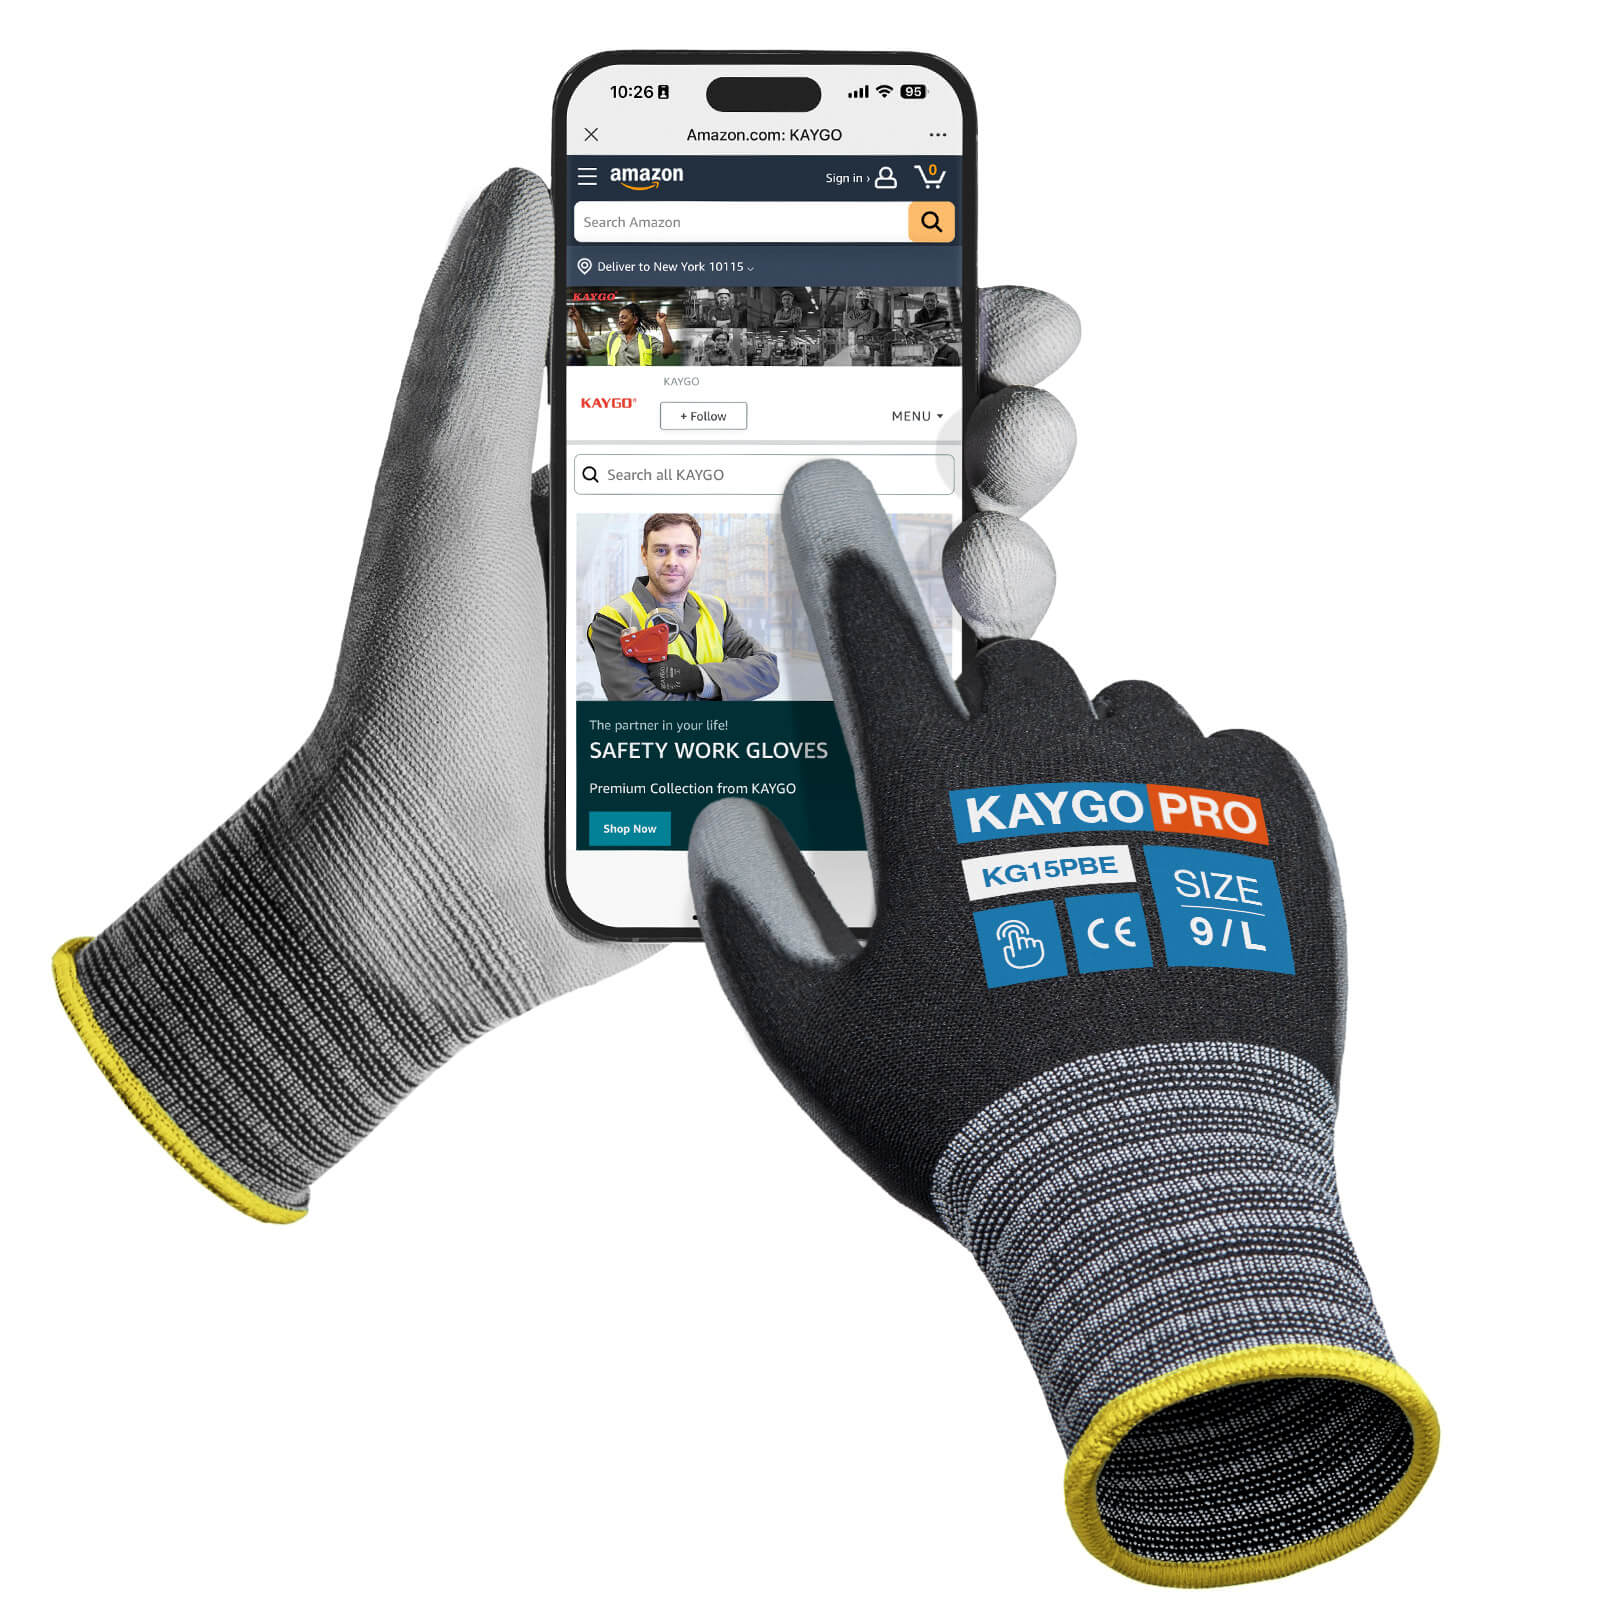 Safety Work Gloves PU Coated-12 Pairs KAYGO KG11PB Seamless Knit Glove with Polyurethane Coated Smooth Grip on Palm & Fingers for Men and Women